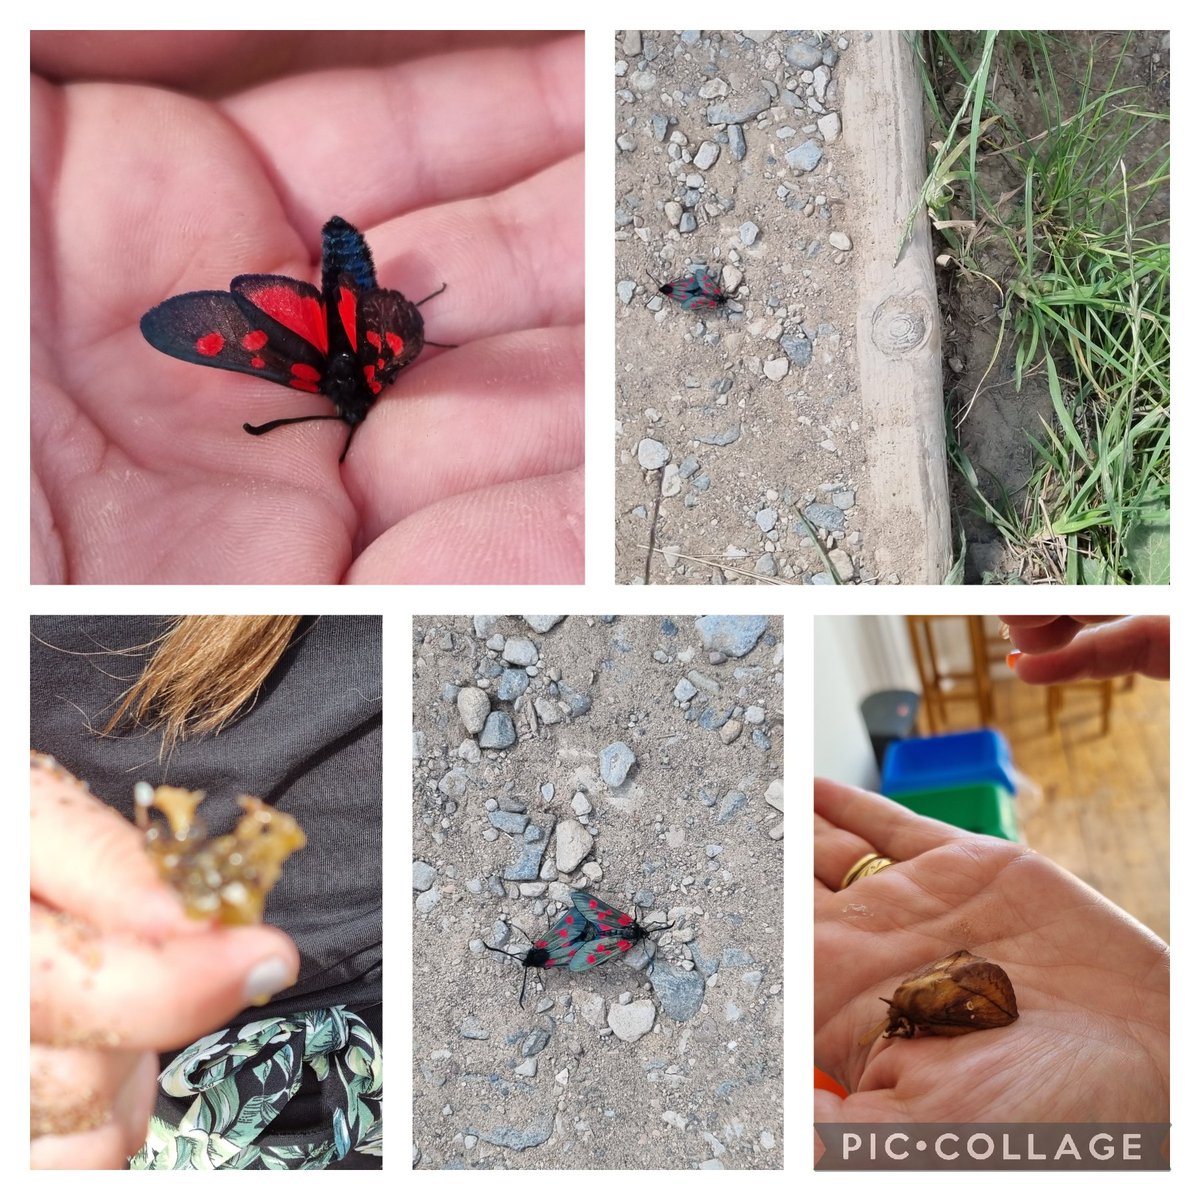 Day 22 #30DaysWild @SHINEmulti @Nottswildlife Y5 have spotted a few insects on their coastal walk @YHAWhitby #residential